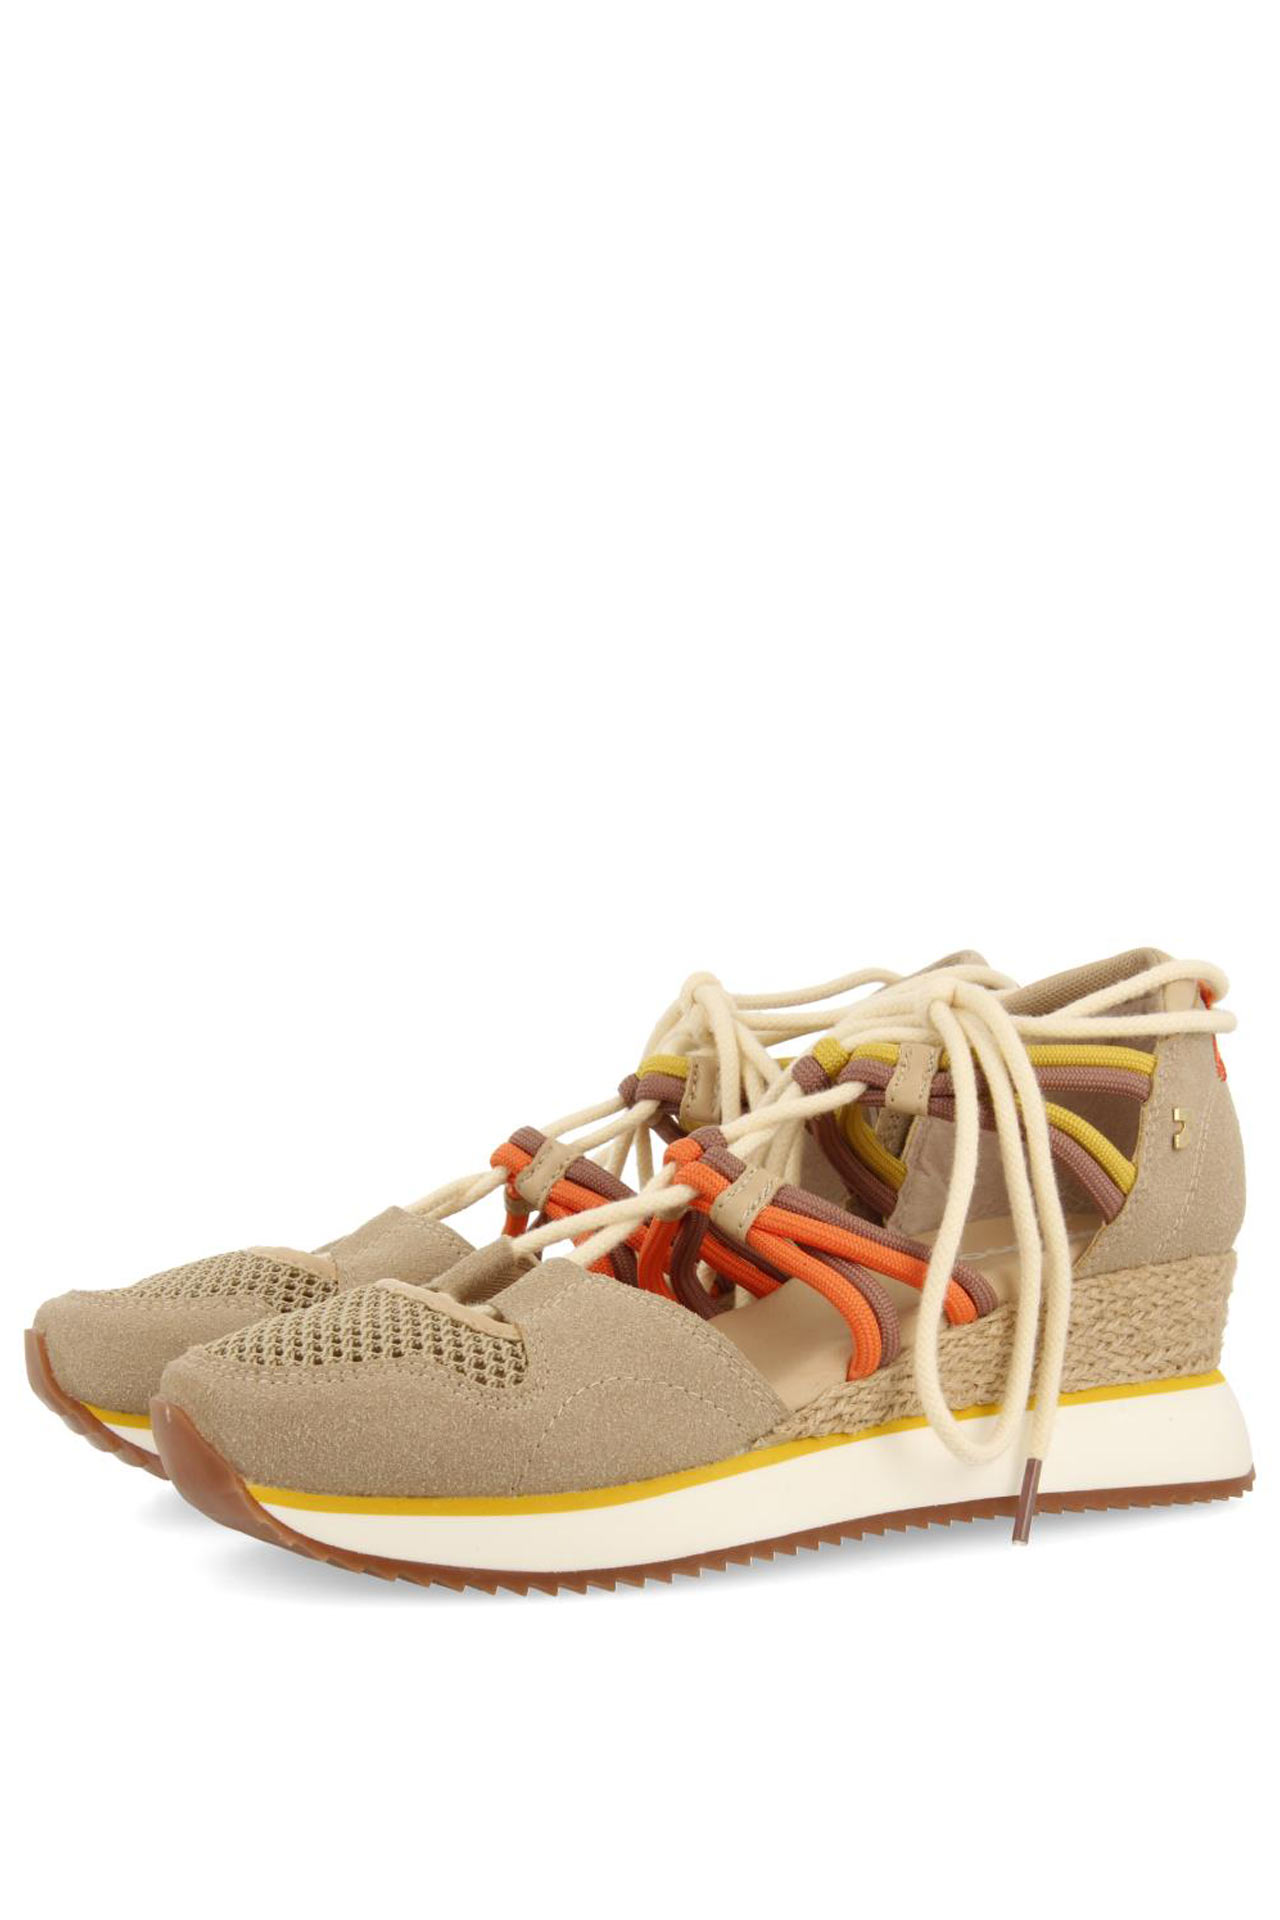 GIOSEPPO IONA BEIGE OPEN SNEAKERS ESPADRILLE TYPE WITH WEDGE